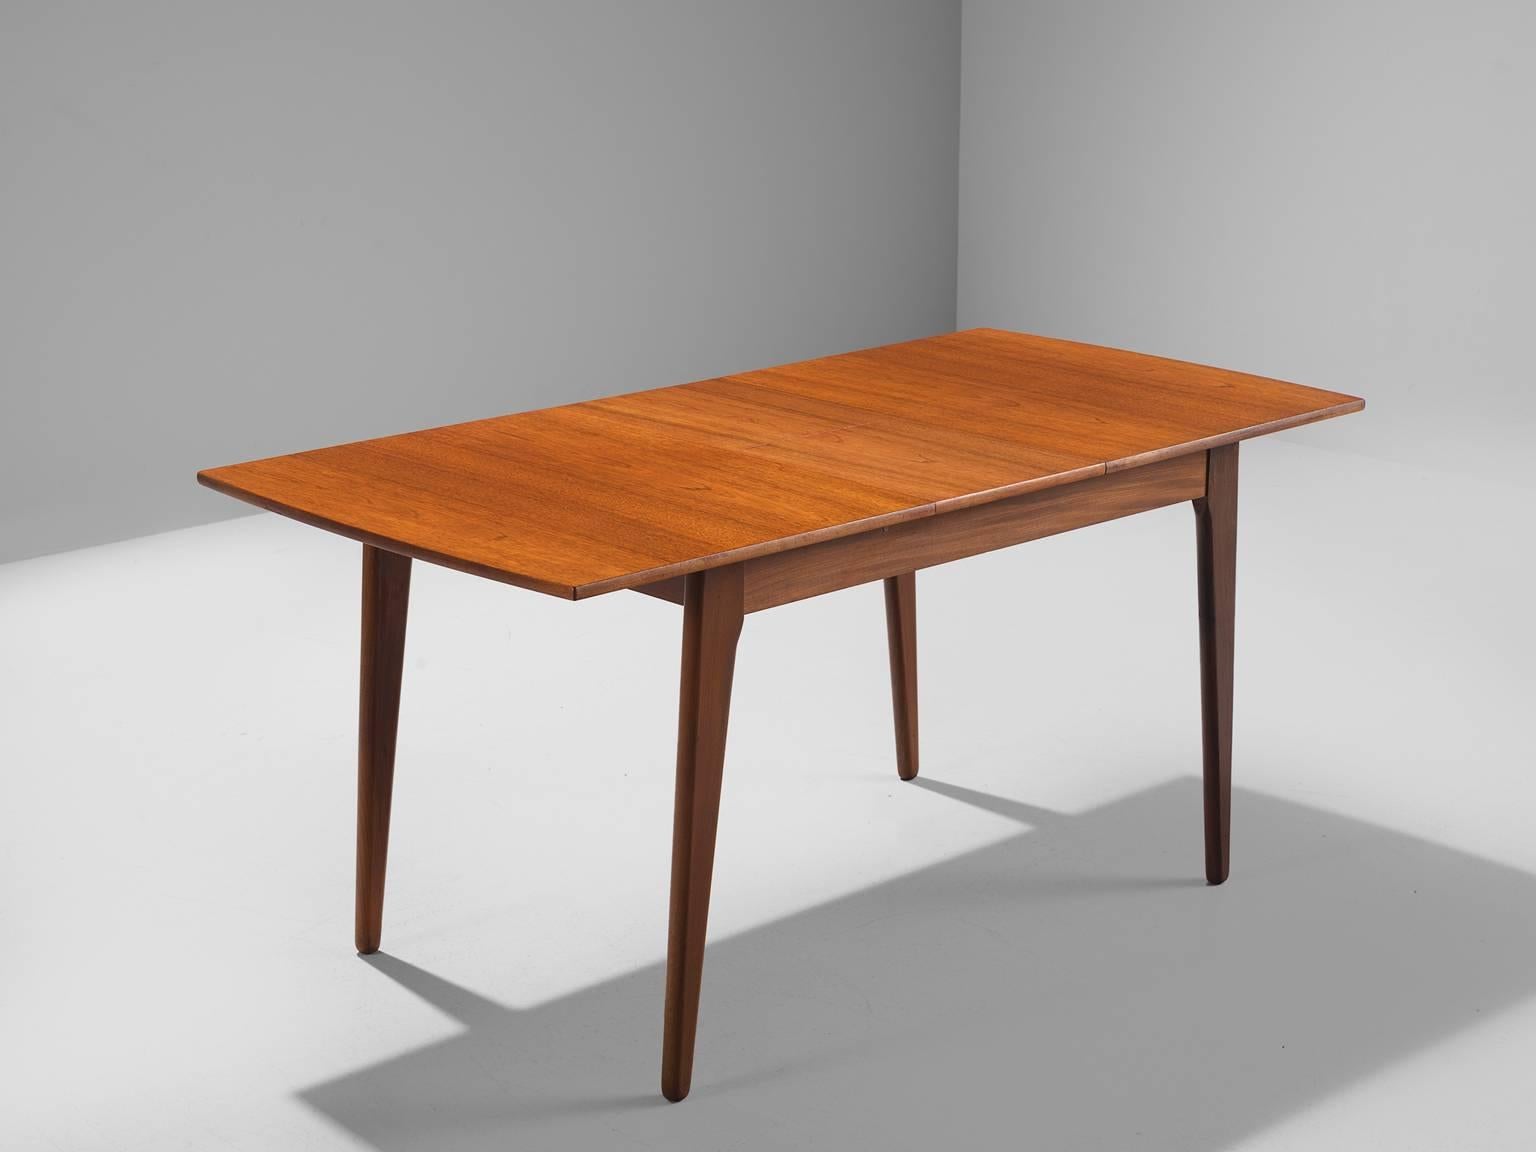 Dining or kitchen table, teak, Denmark, 1950s

This table is made from teak and has two extra leaves and can thus be extendable to a table for four people. The grain and flames in the table give this otherwise modest and simple table a very warm